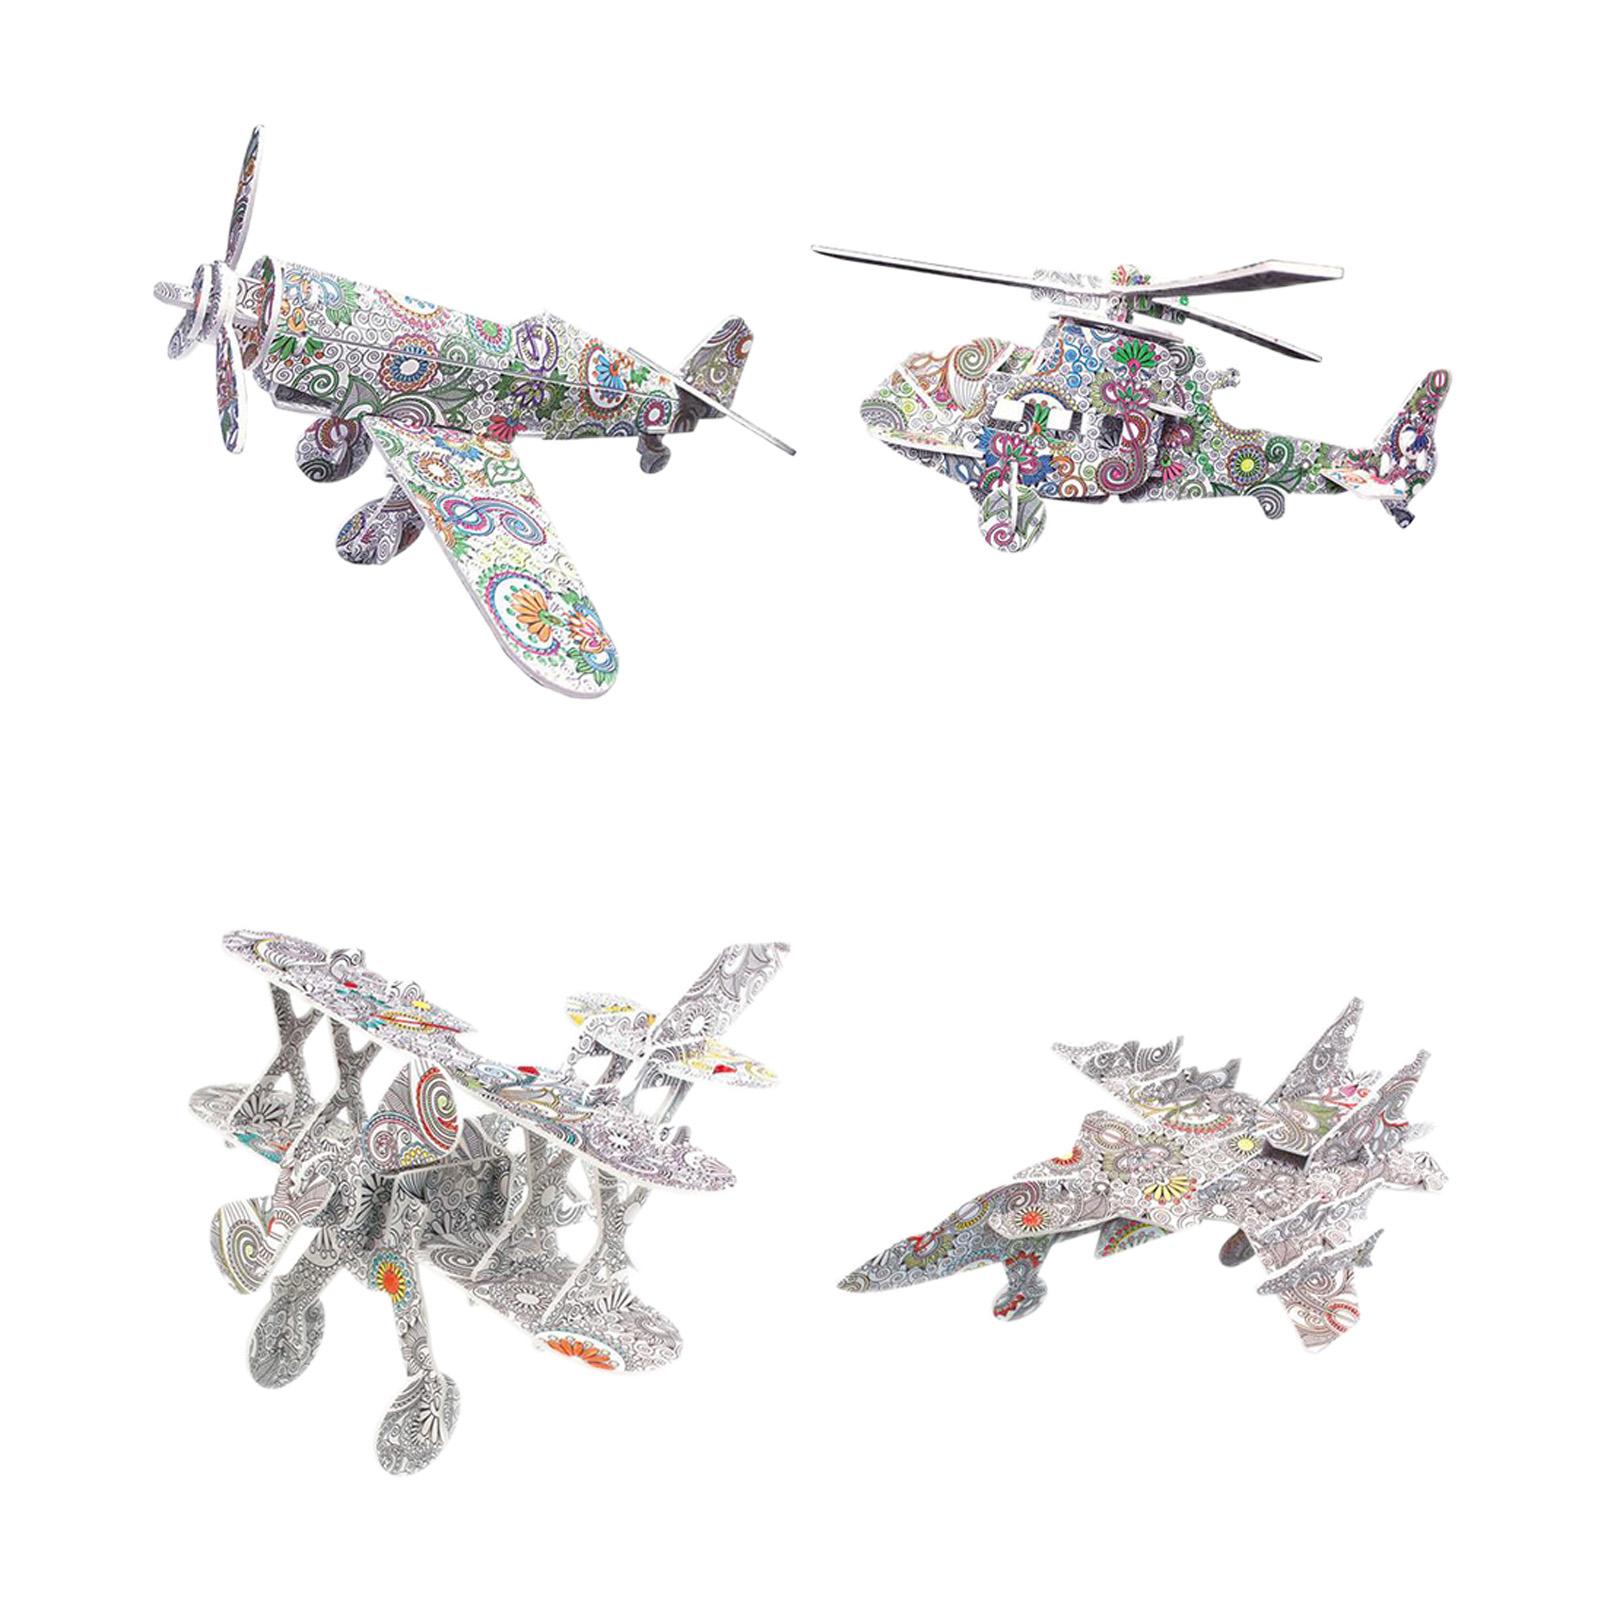 3D Coloring Puzzle Set Creativity Xmas DIY Gift for Boys Girls  3D Airplane